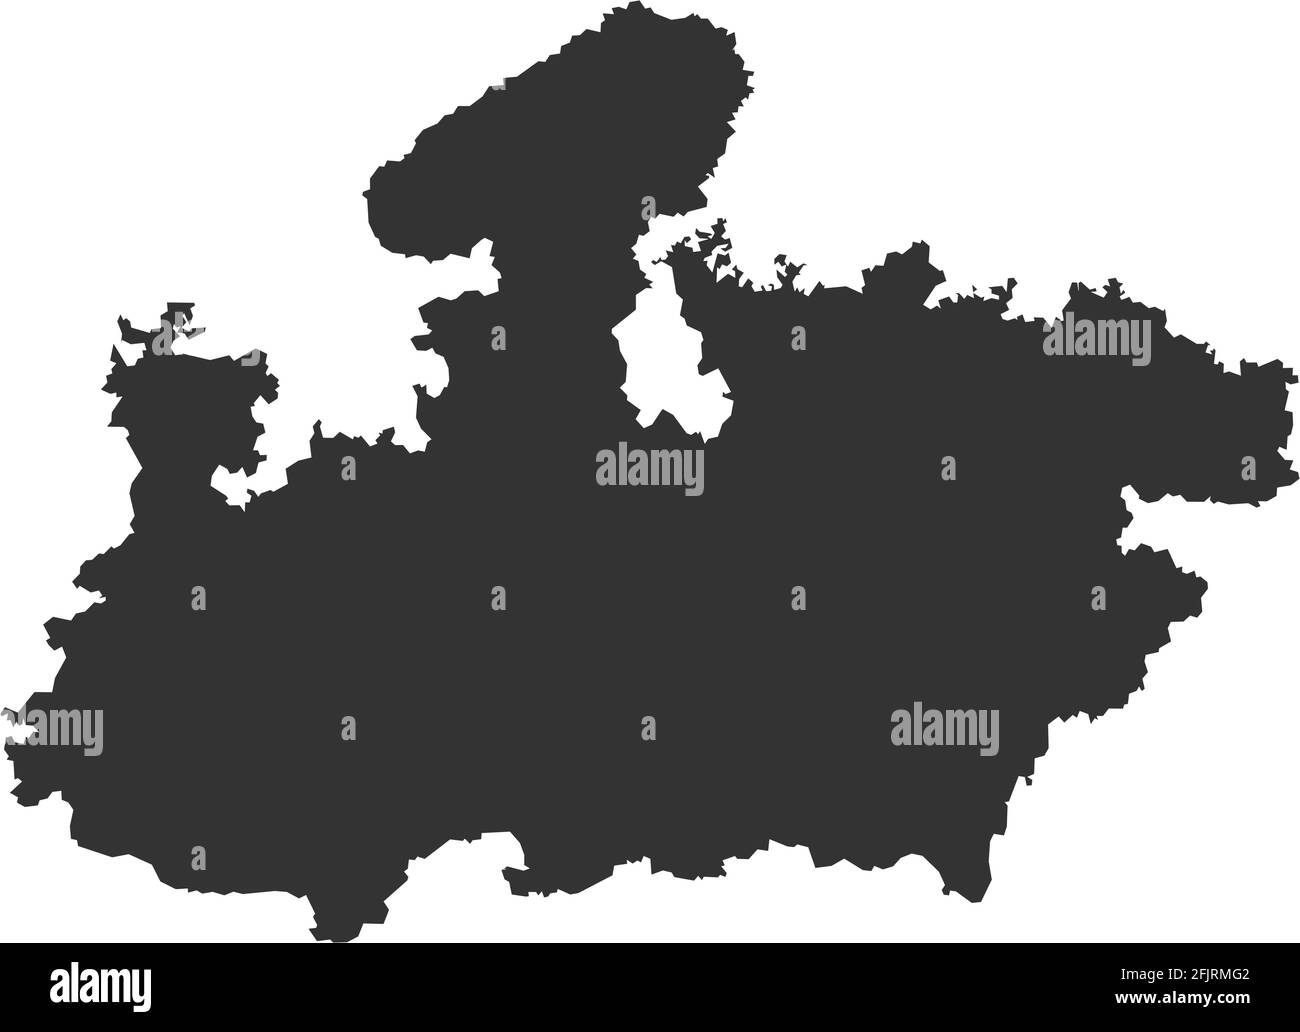 Madhya pradesh indian state map. Dark gray background. Business concepts graphics design. Stock Vector